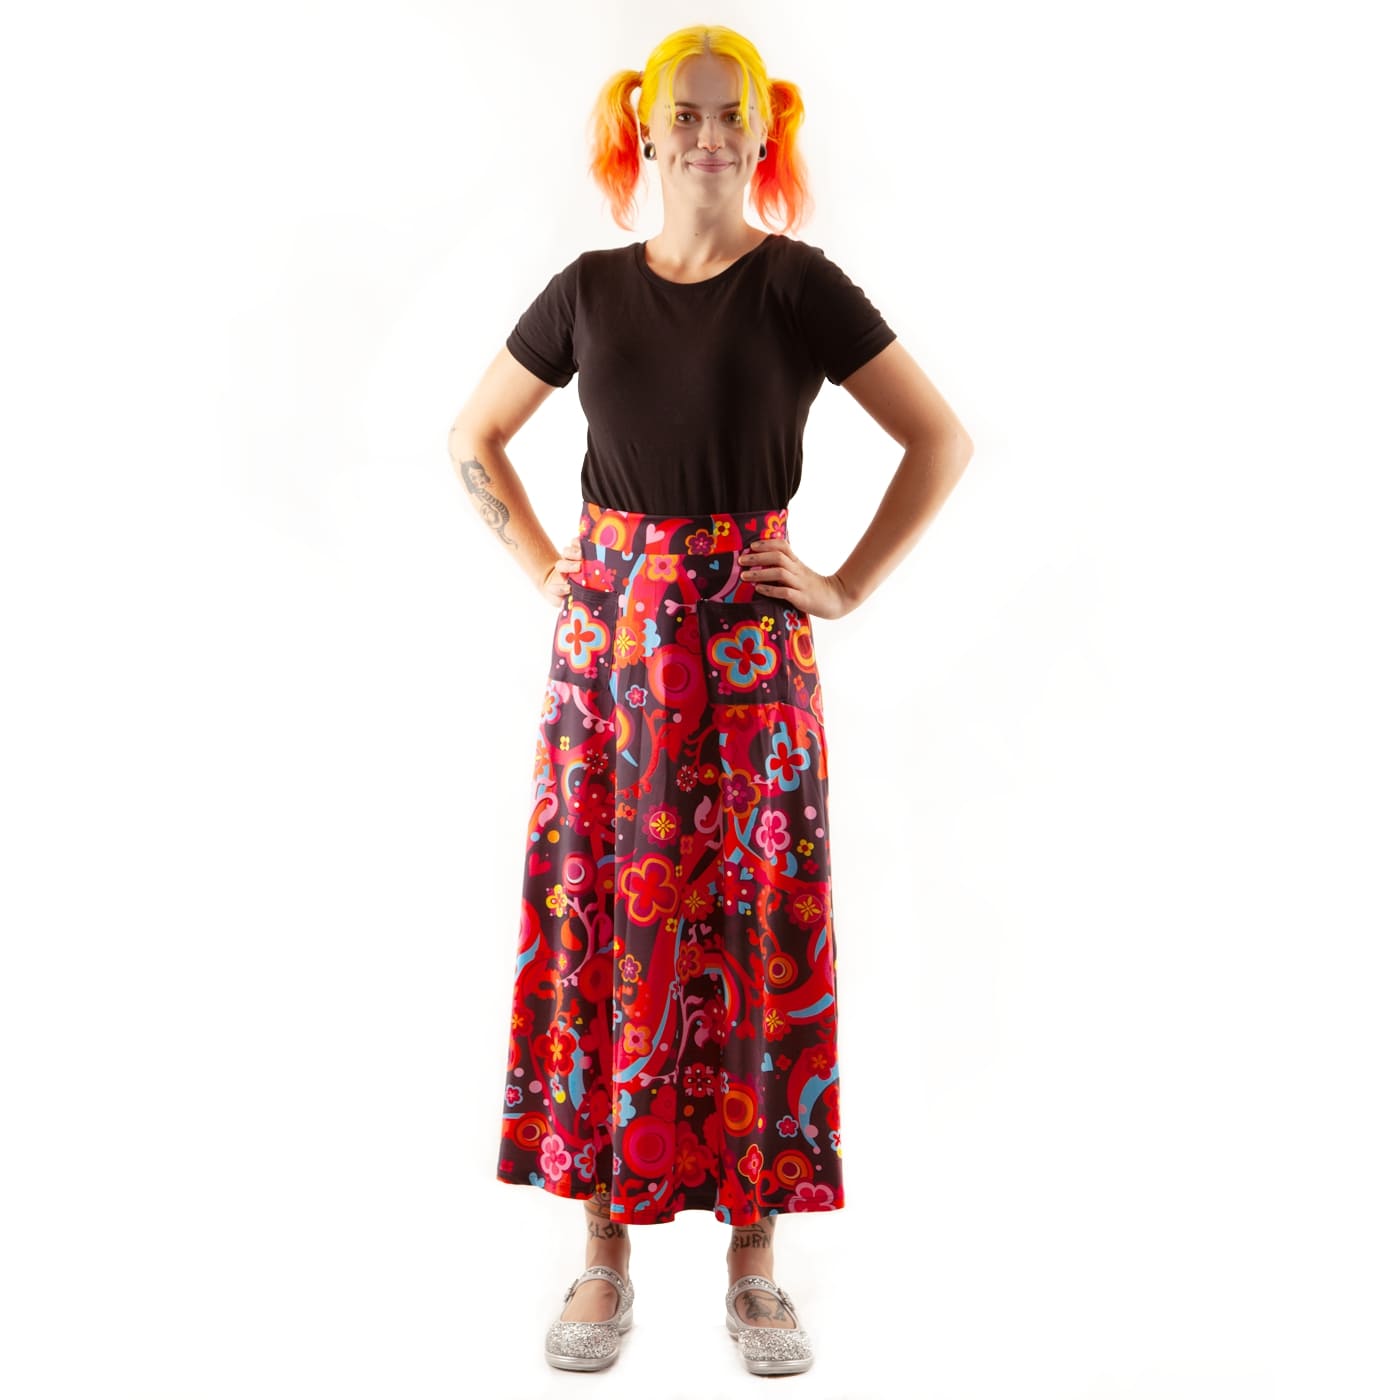 Groovy Maxi Skirt by RainbowsAndFairies.com.au (Flower Power - Psychedelic - Woodstock - Skirt With Pockets - Boho - Mod Retro - Vintage Inspired) - SKU: CL_MAXIS_GROOV_ORG - Pic-03